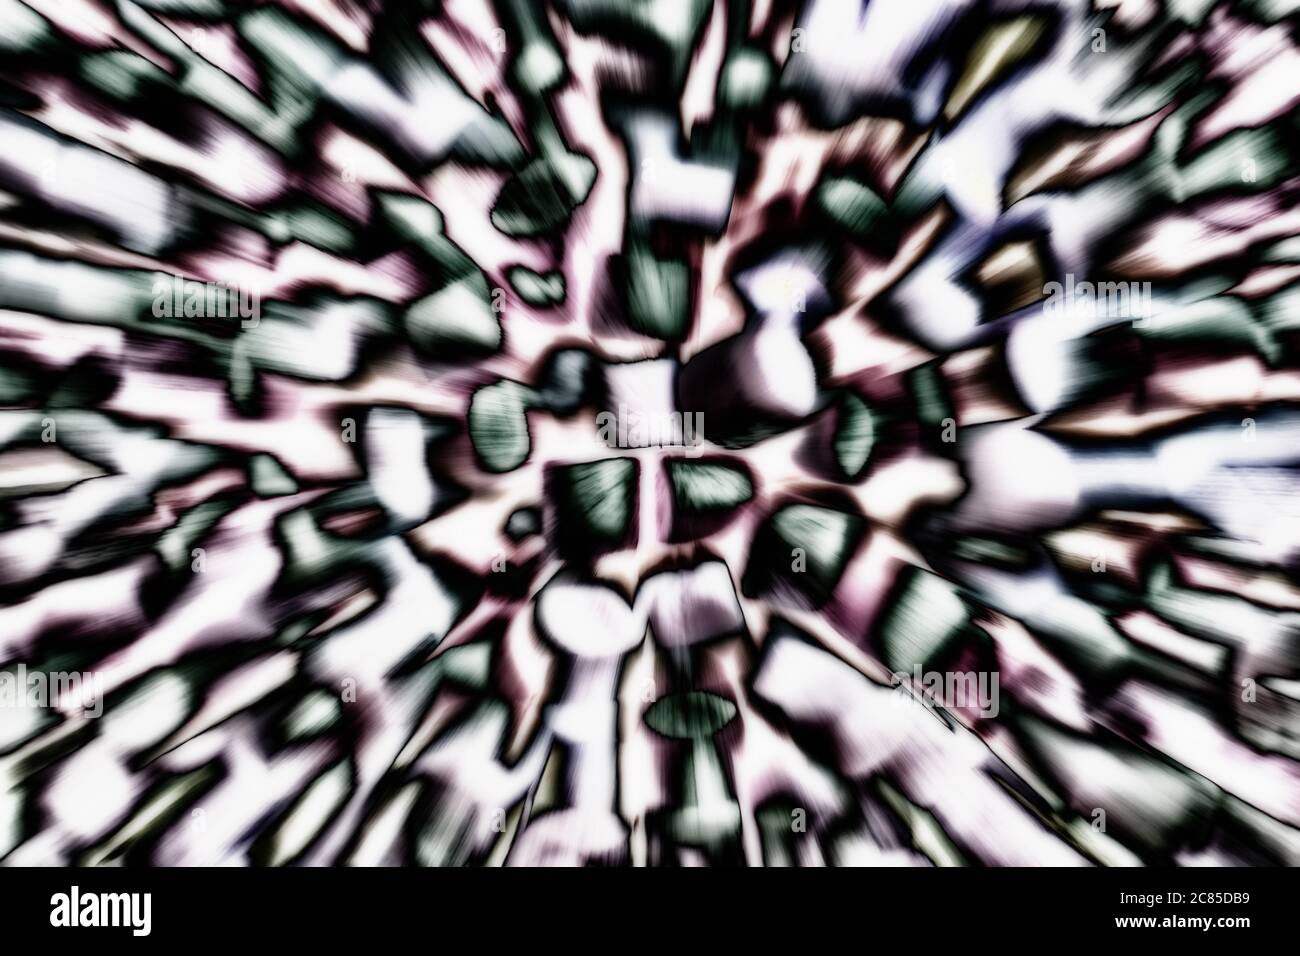 Zoom burst visual effect background of  abstract digital cube computer graphic Stock Photo